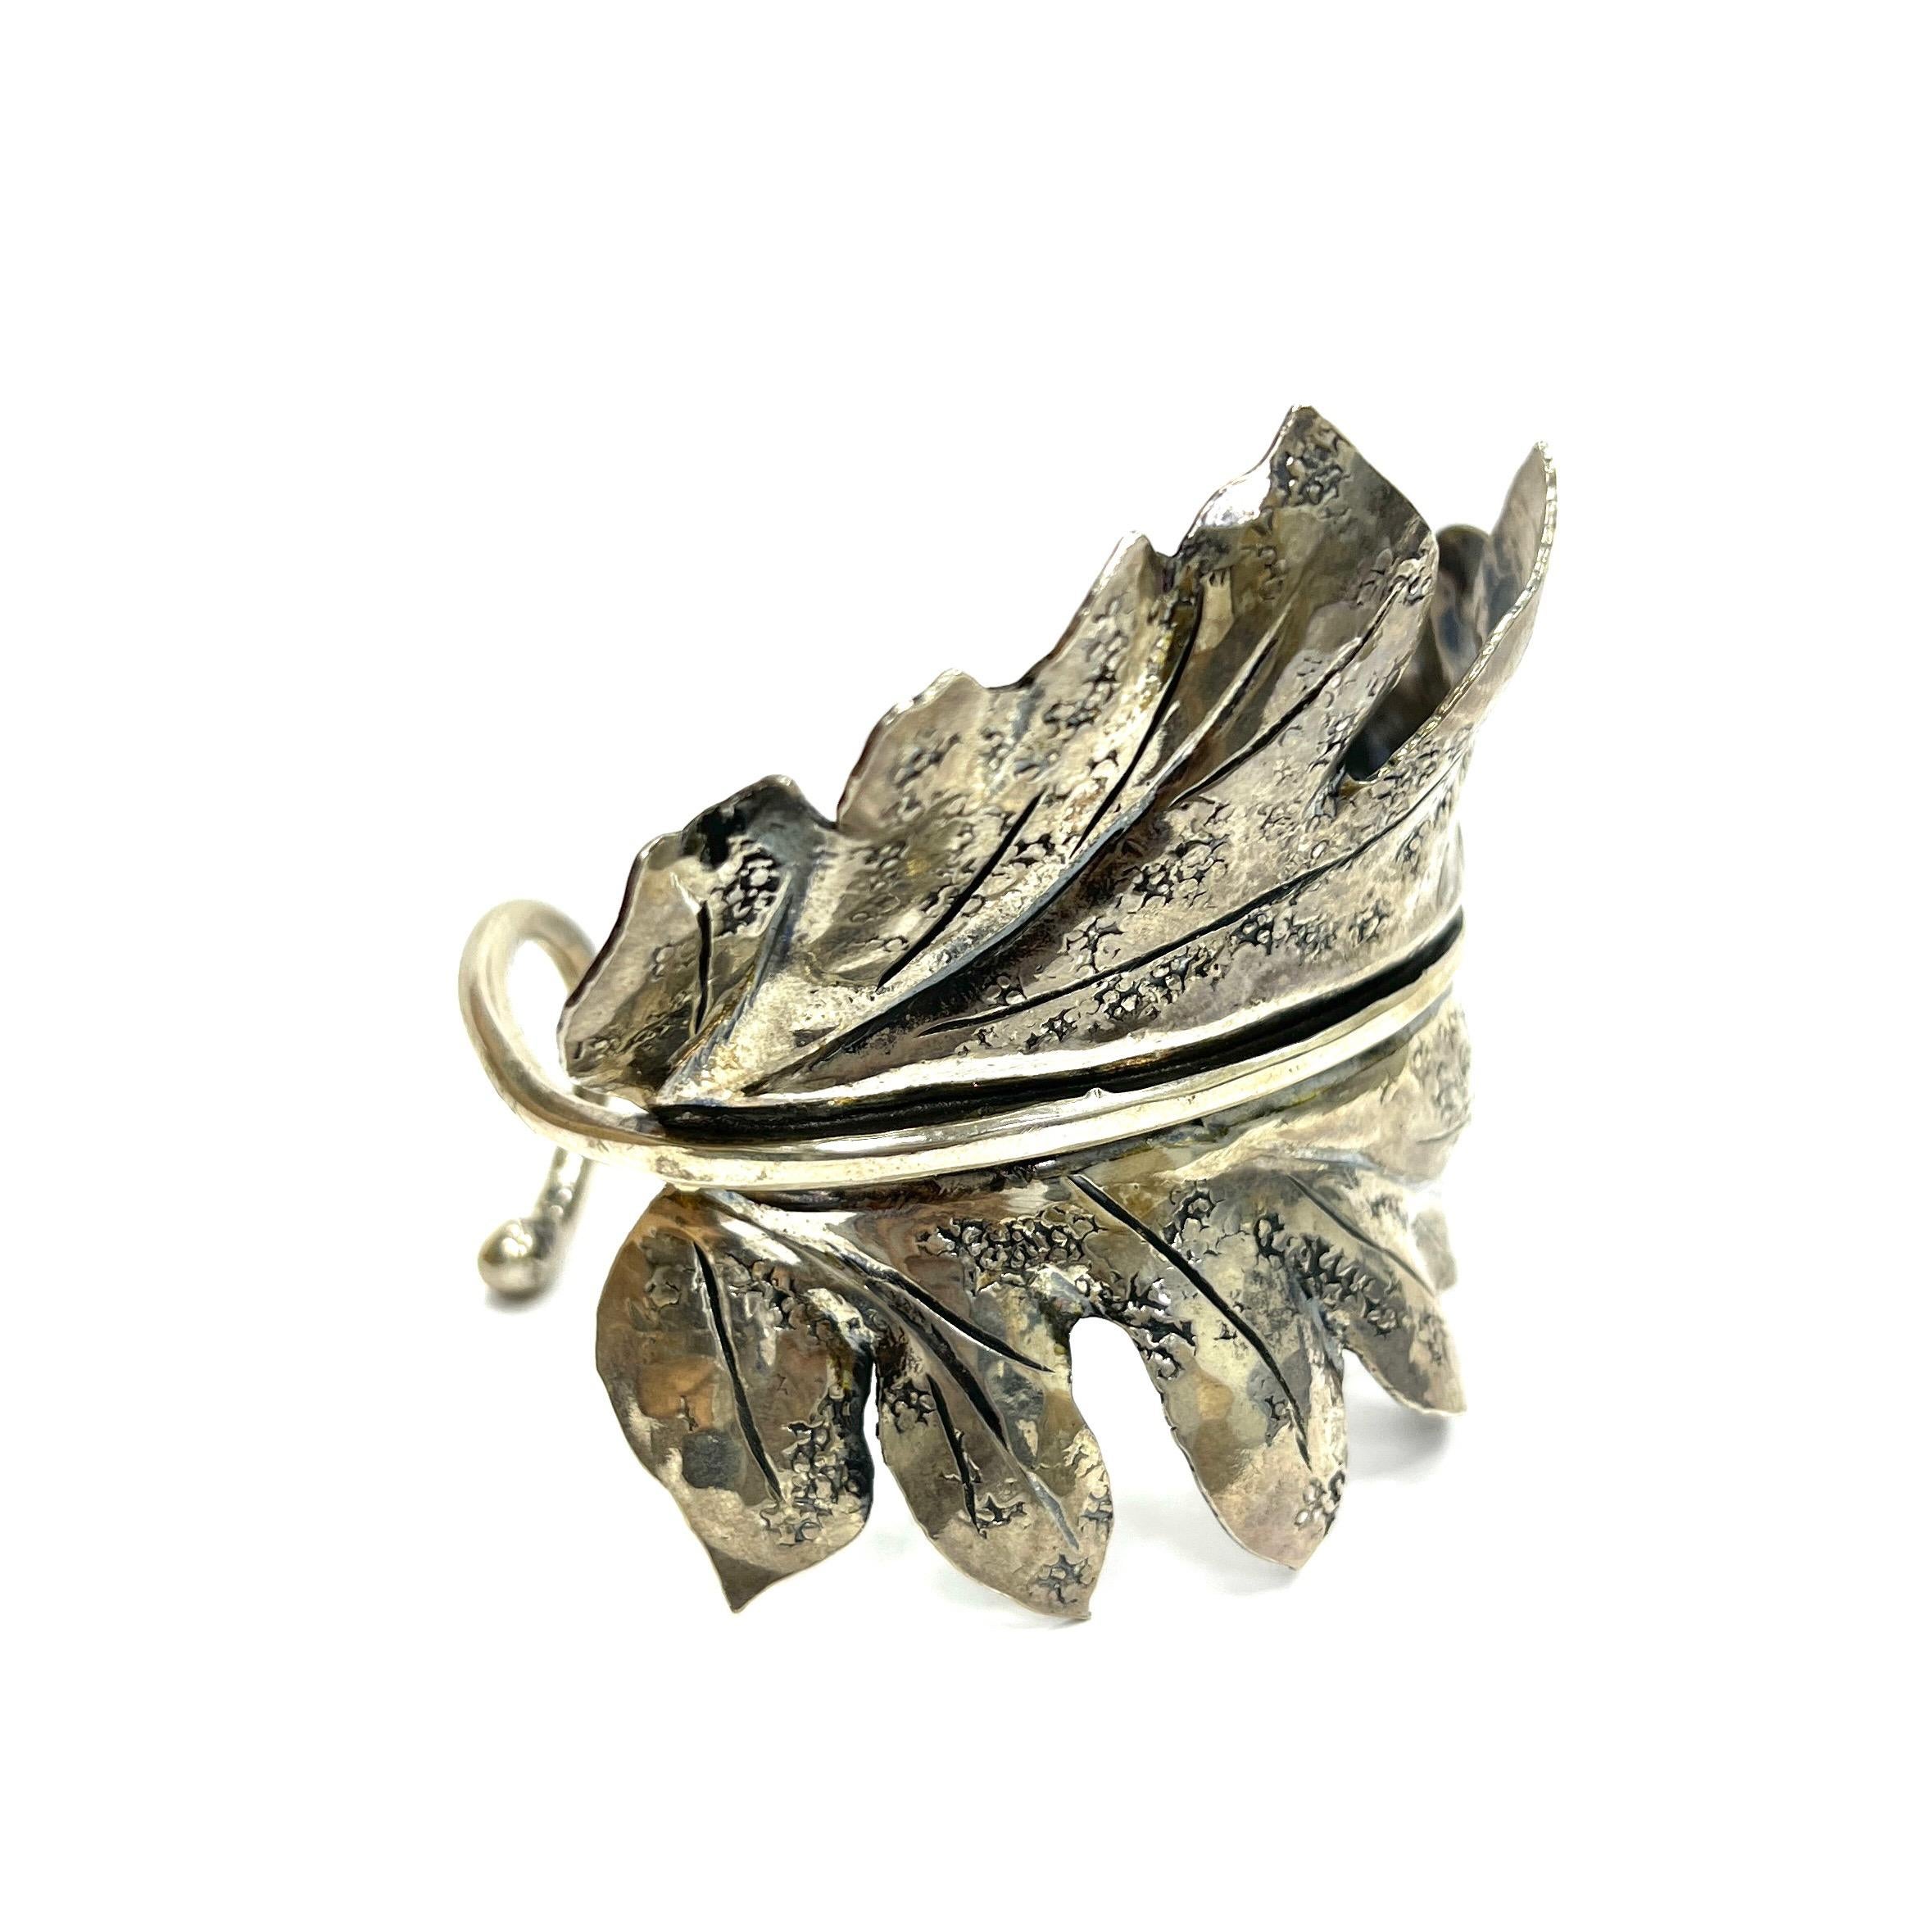 Buccellati Mario Leaf Sterling Silver Cuff Bracelet, Italian

Tomato leaf design made of sterling silver; marked Buccellati, Italy, 925, Sterling

Size: width 2.5 inches; inner circumference 6.75 inches
Total weight: 45.8 grams